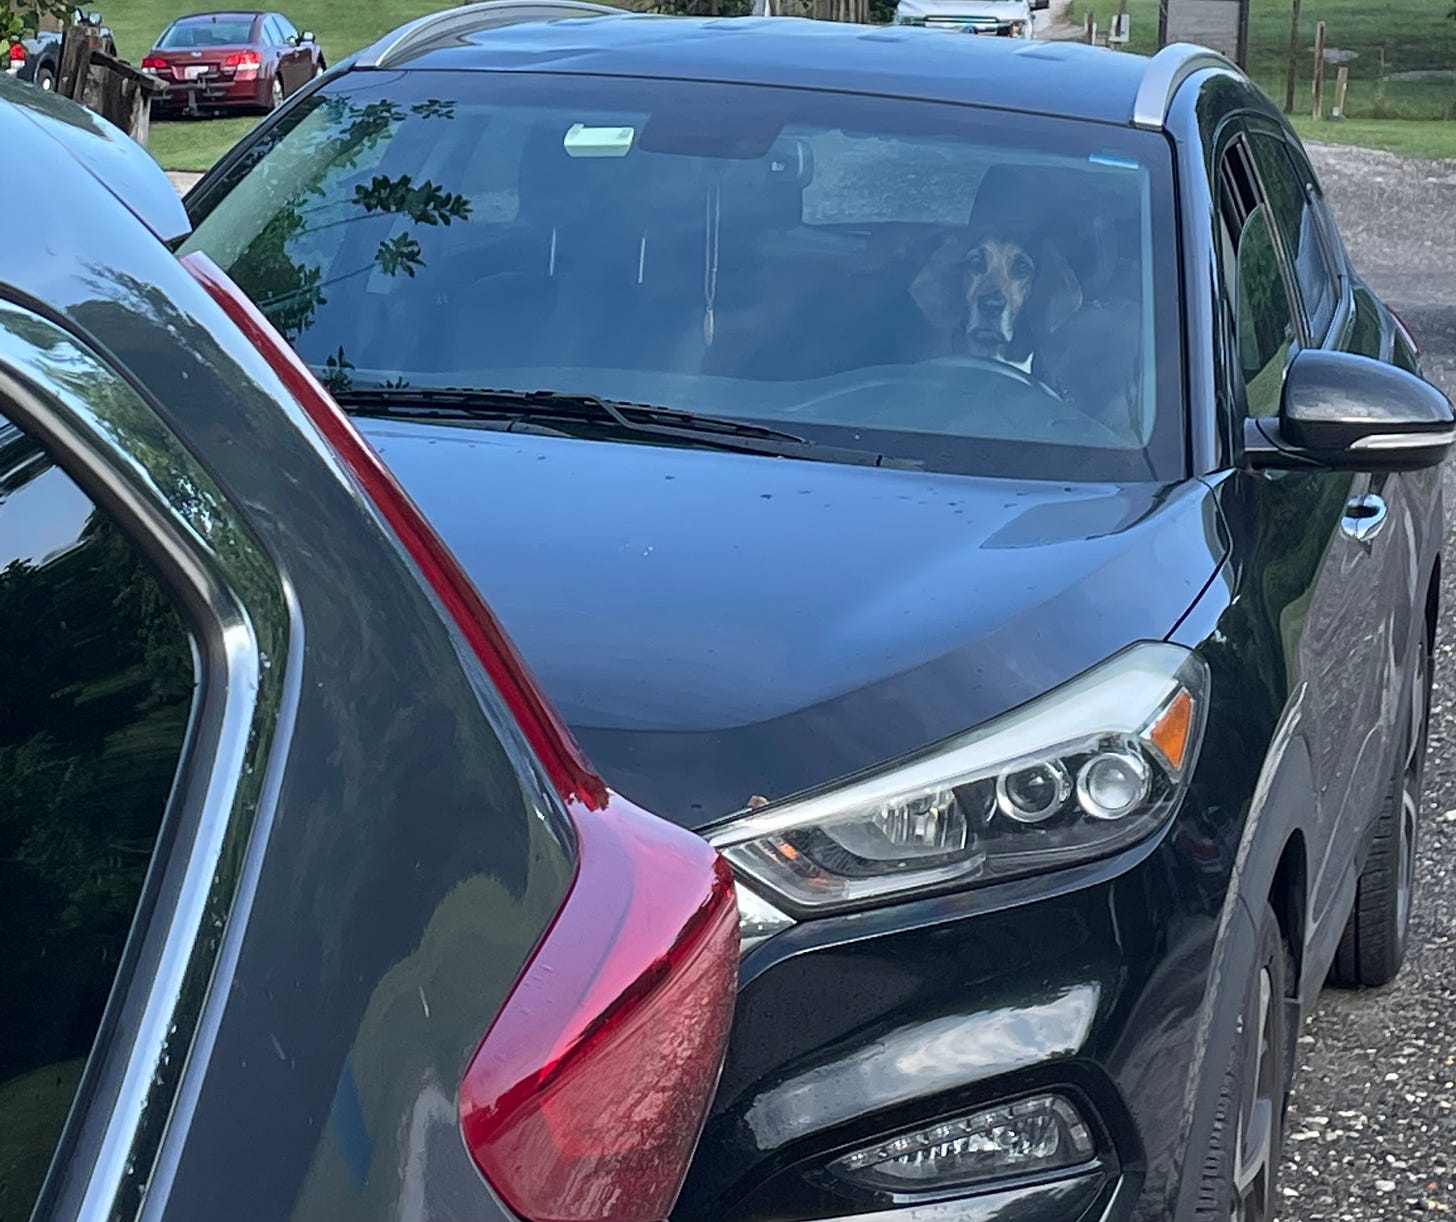 This is a dog driving a car.